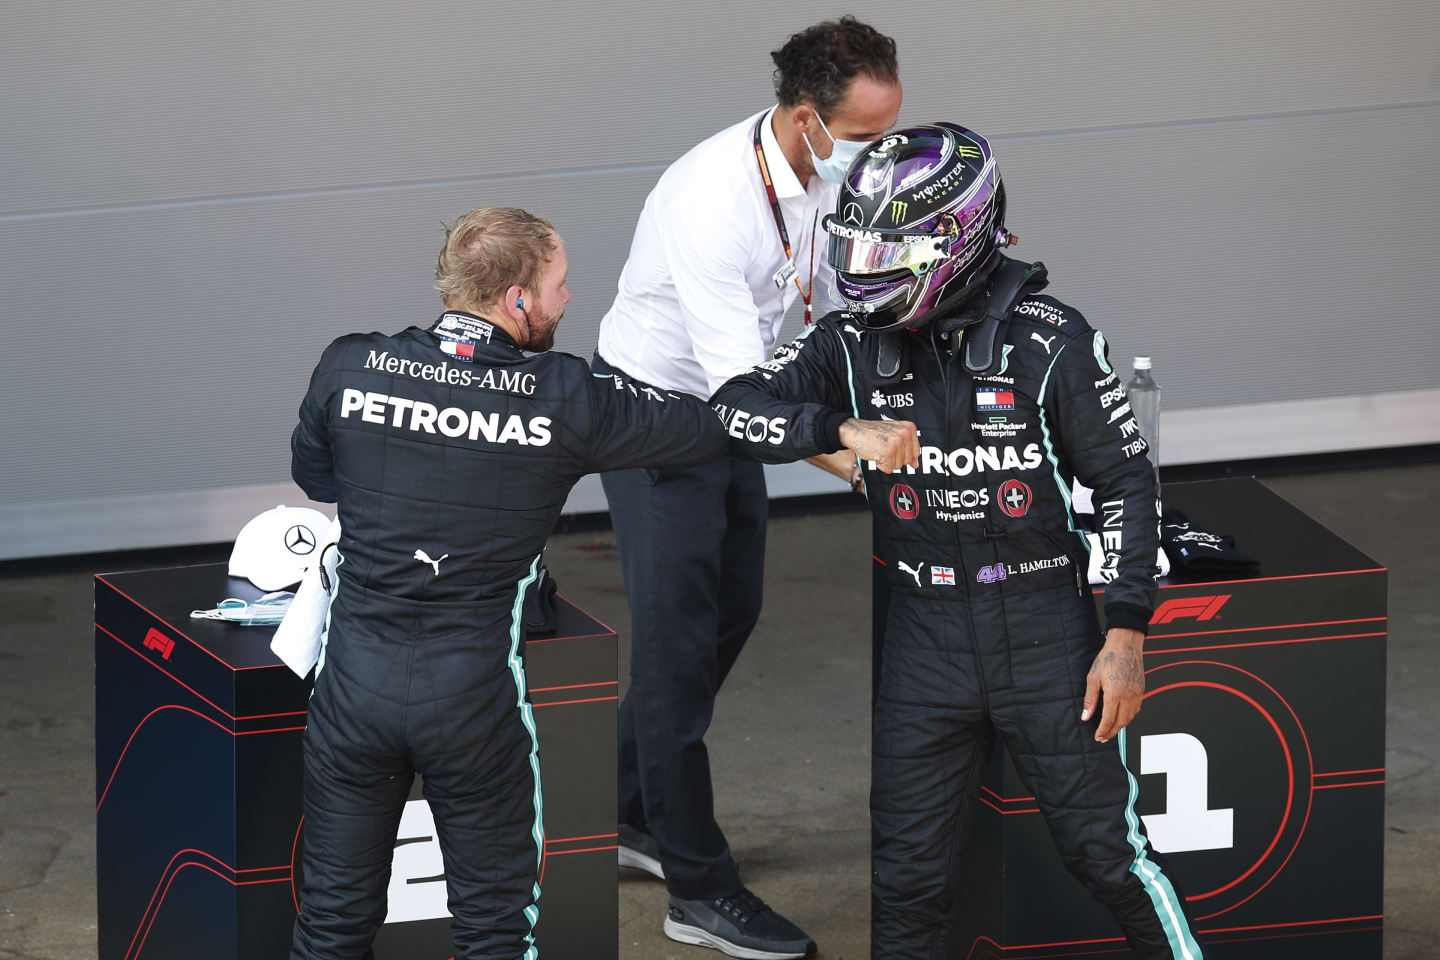 BARCELONA, SPAIN - AUGUST 15: Second placed qualifier Valtteri Bottas of Finland and Mercedes GP and Pole position qualifier Lewis Hamilton of Great Britain and Mercedes GP celebrate in parc ferme during qualifying for the F1 Grand Prix of Spain at Circuit de Barcelona-Catalunya on August 15, 2020 in Barcelona, Spain. (Photo by Alejandro Garcia/Pool via Getty Images)